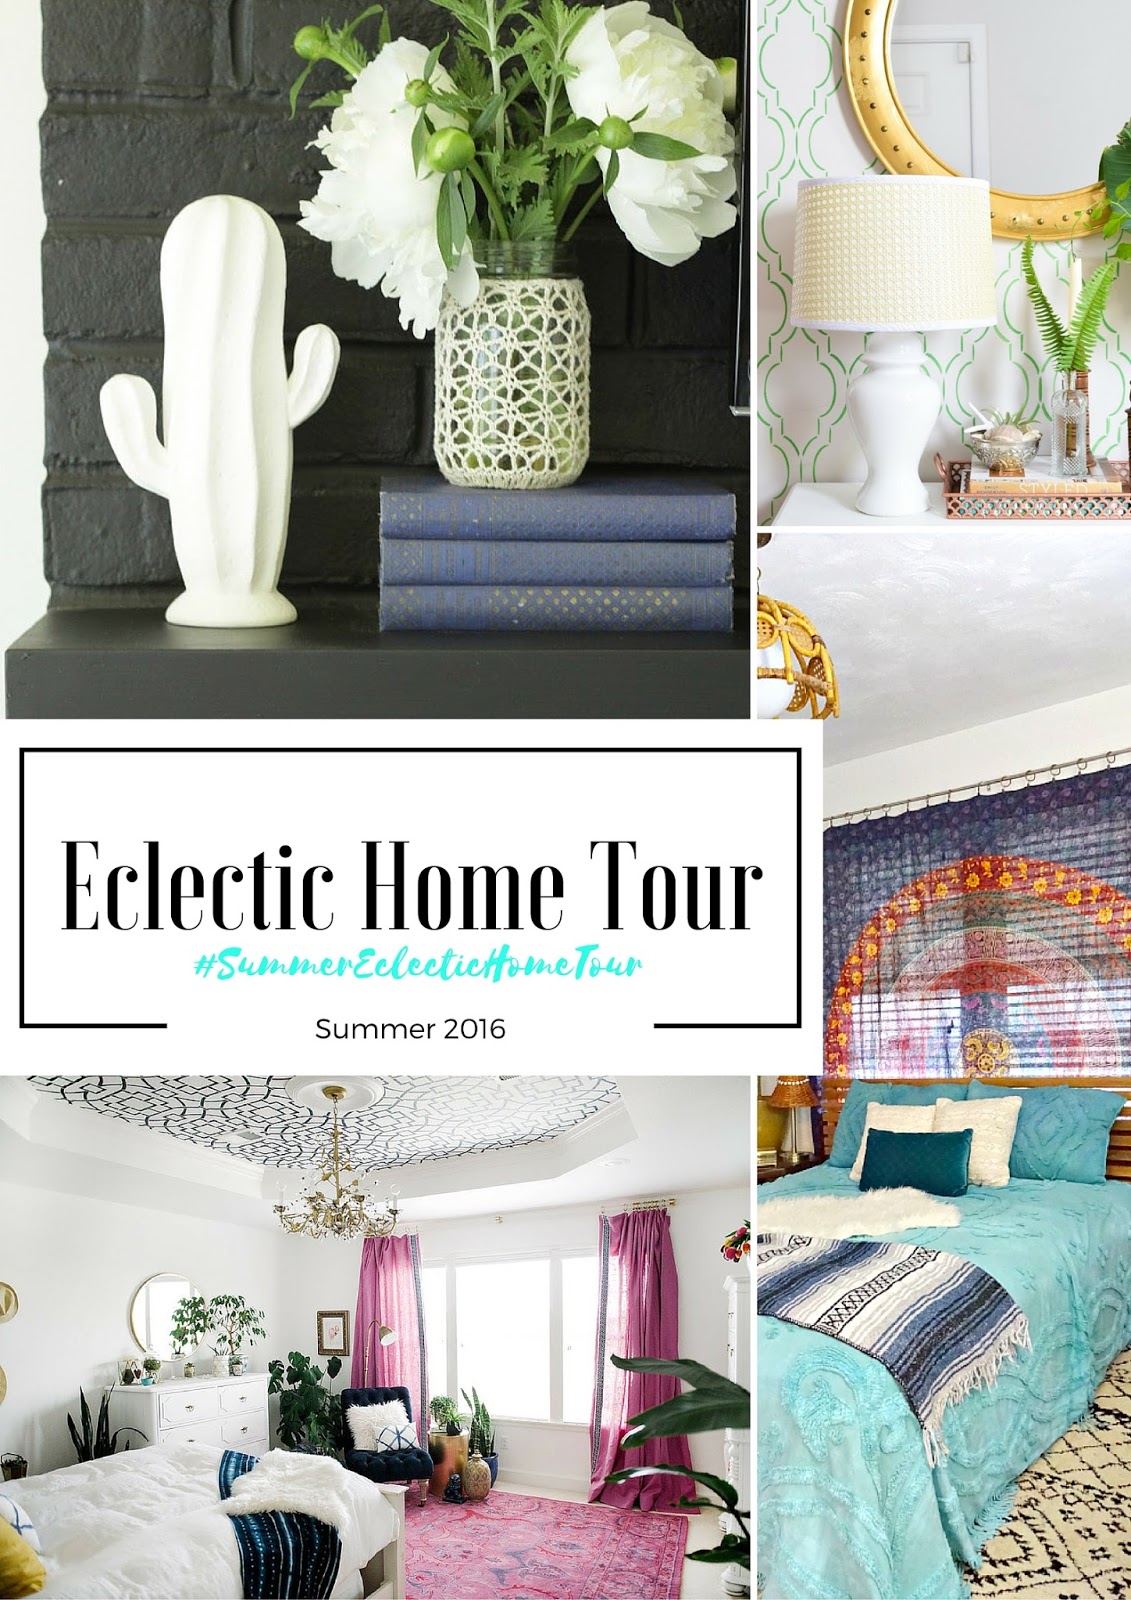 Eclectic Home Tour- friday